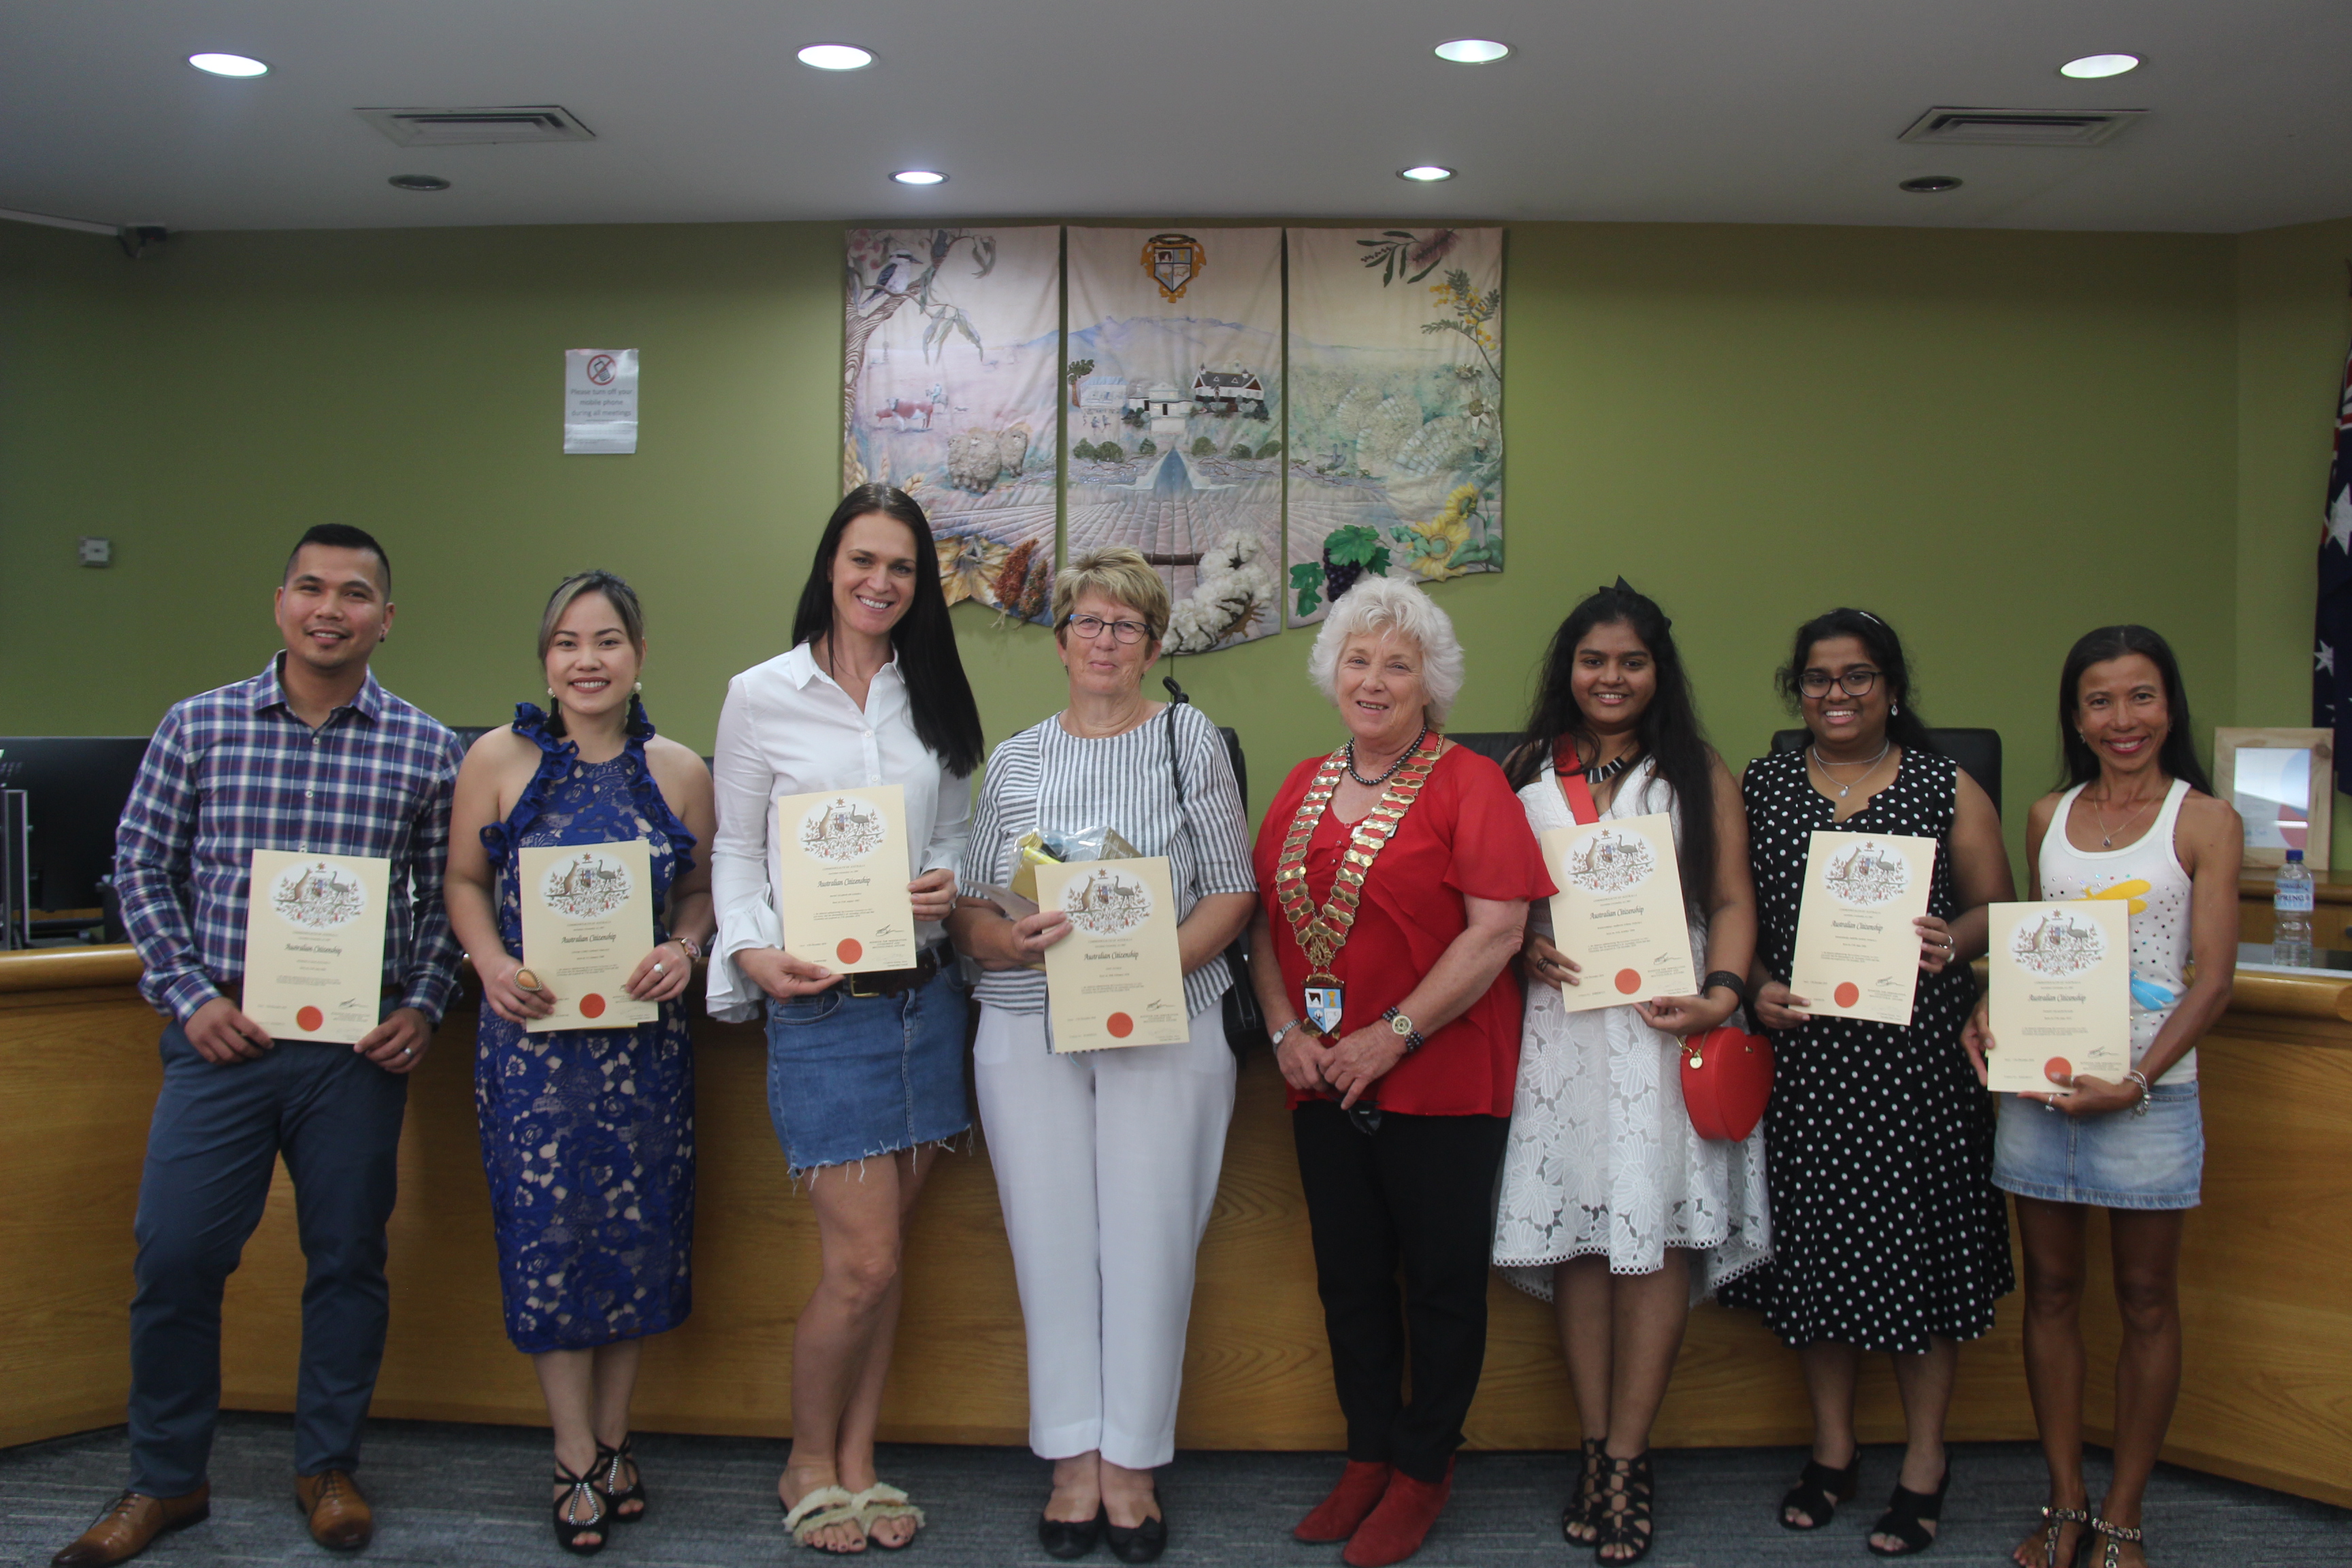 New citizens welcomed at Shire Council ceremony